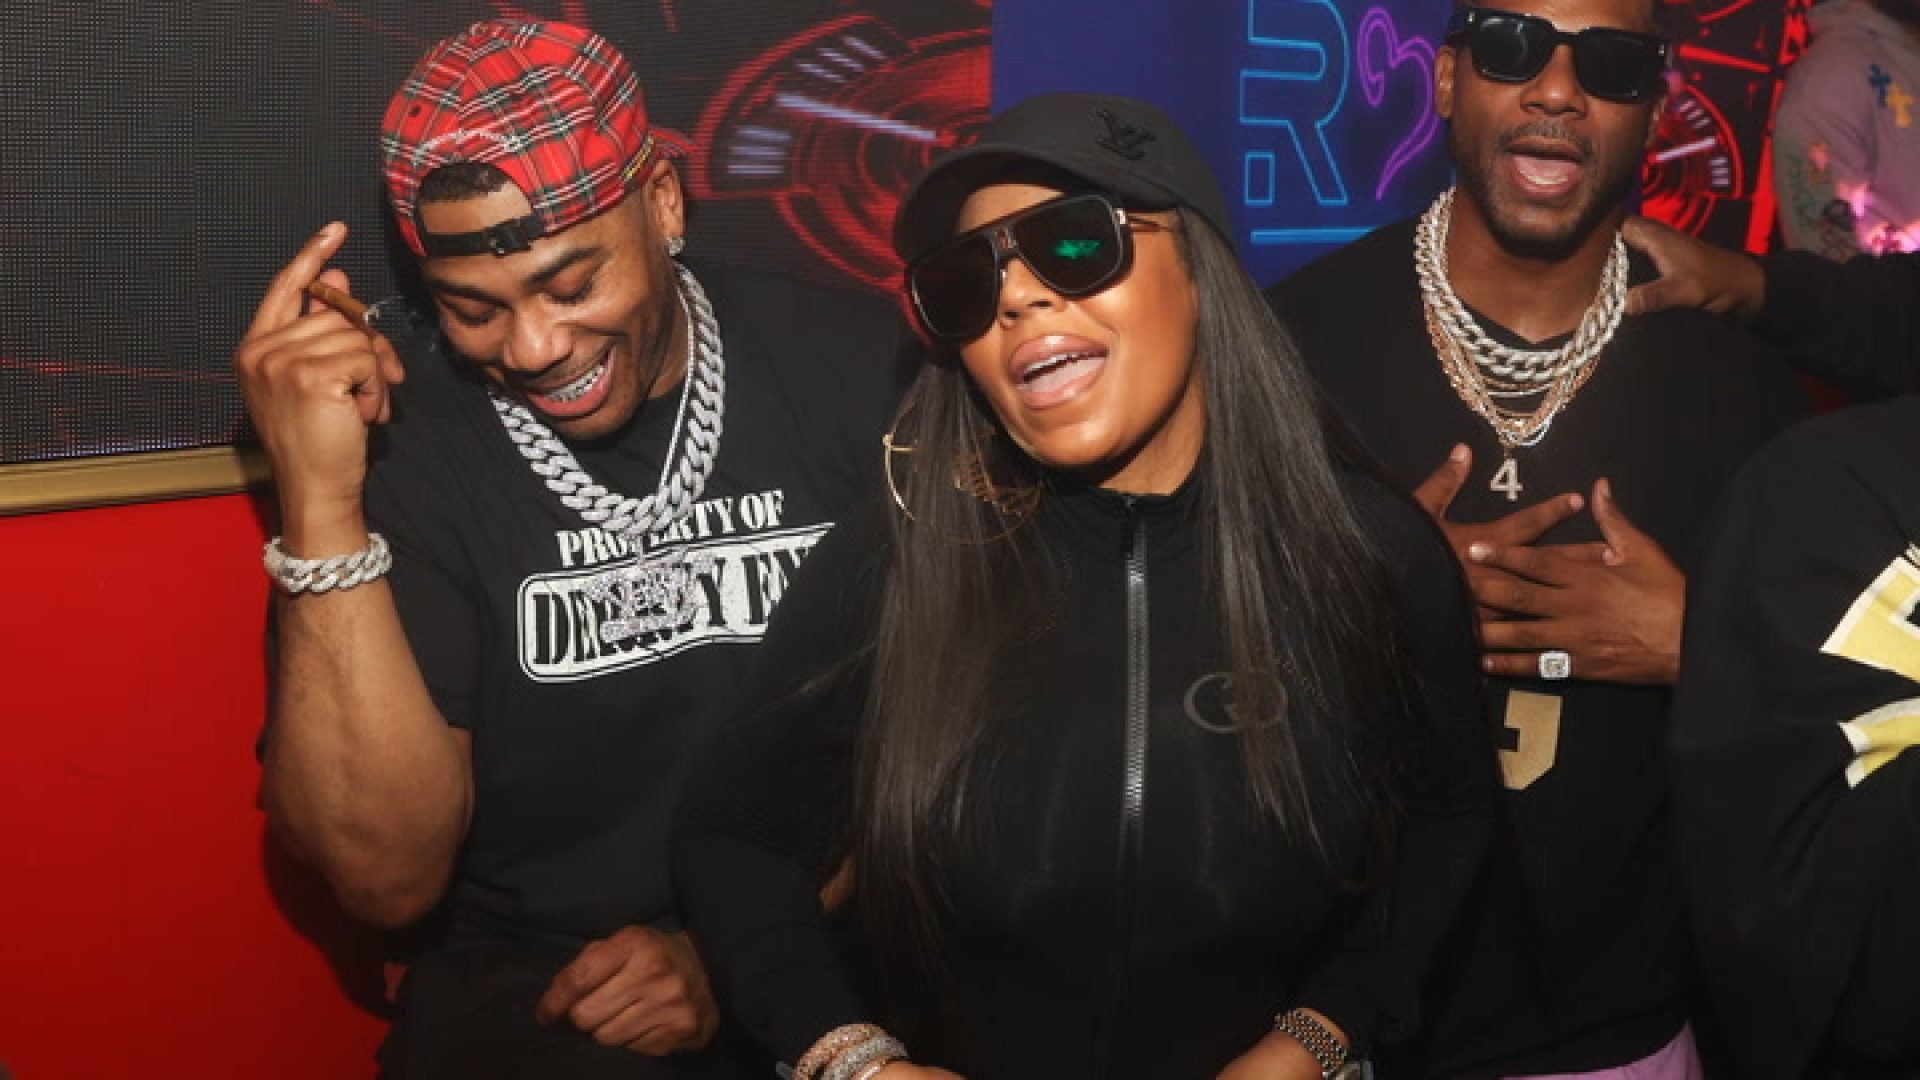 WATCH: In My Feed – A Reunited Ashanti And Nelly Step Out For Date Night